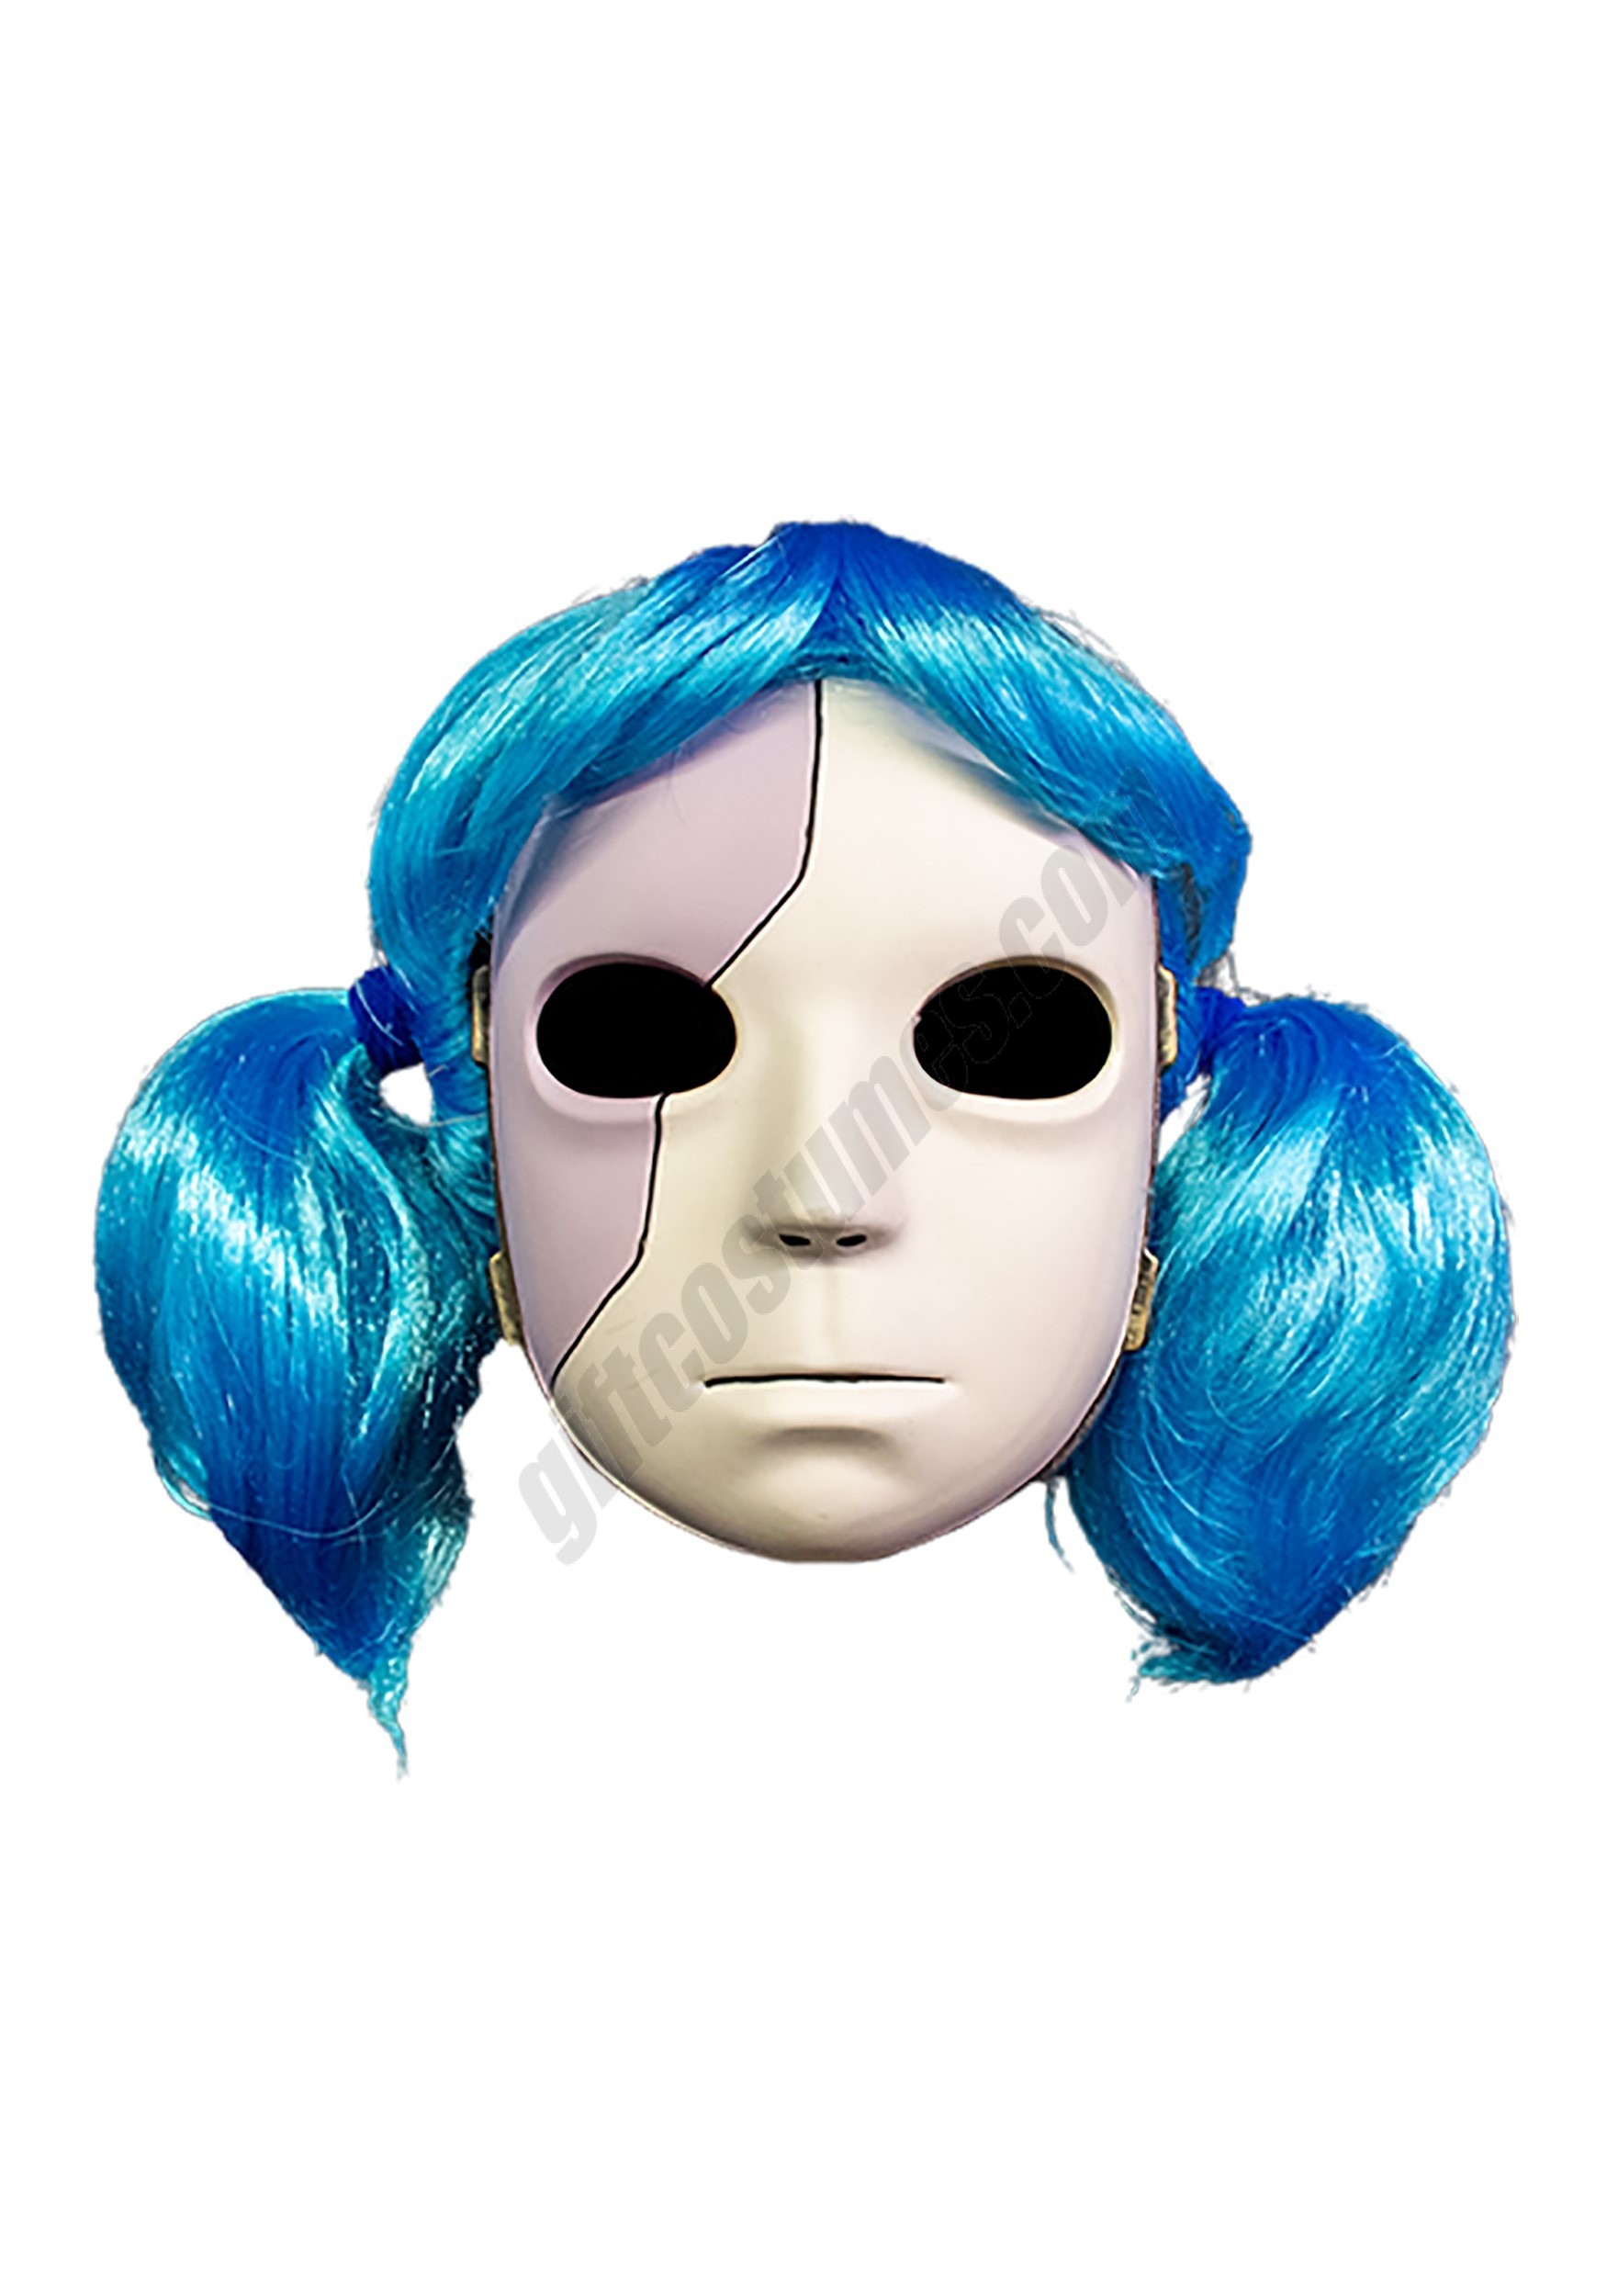 Sally Face Mask and Wig Combo for Adults Promotions - Sally Face Mask and Wig Combo for Adults Promotions